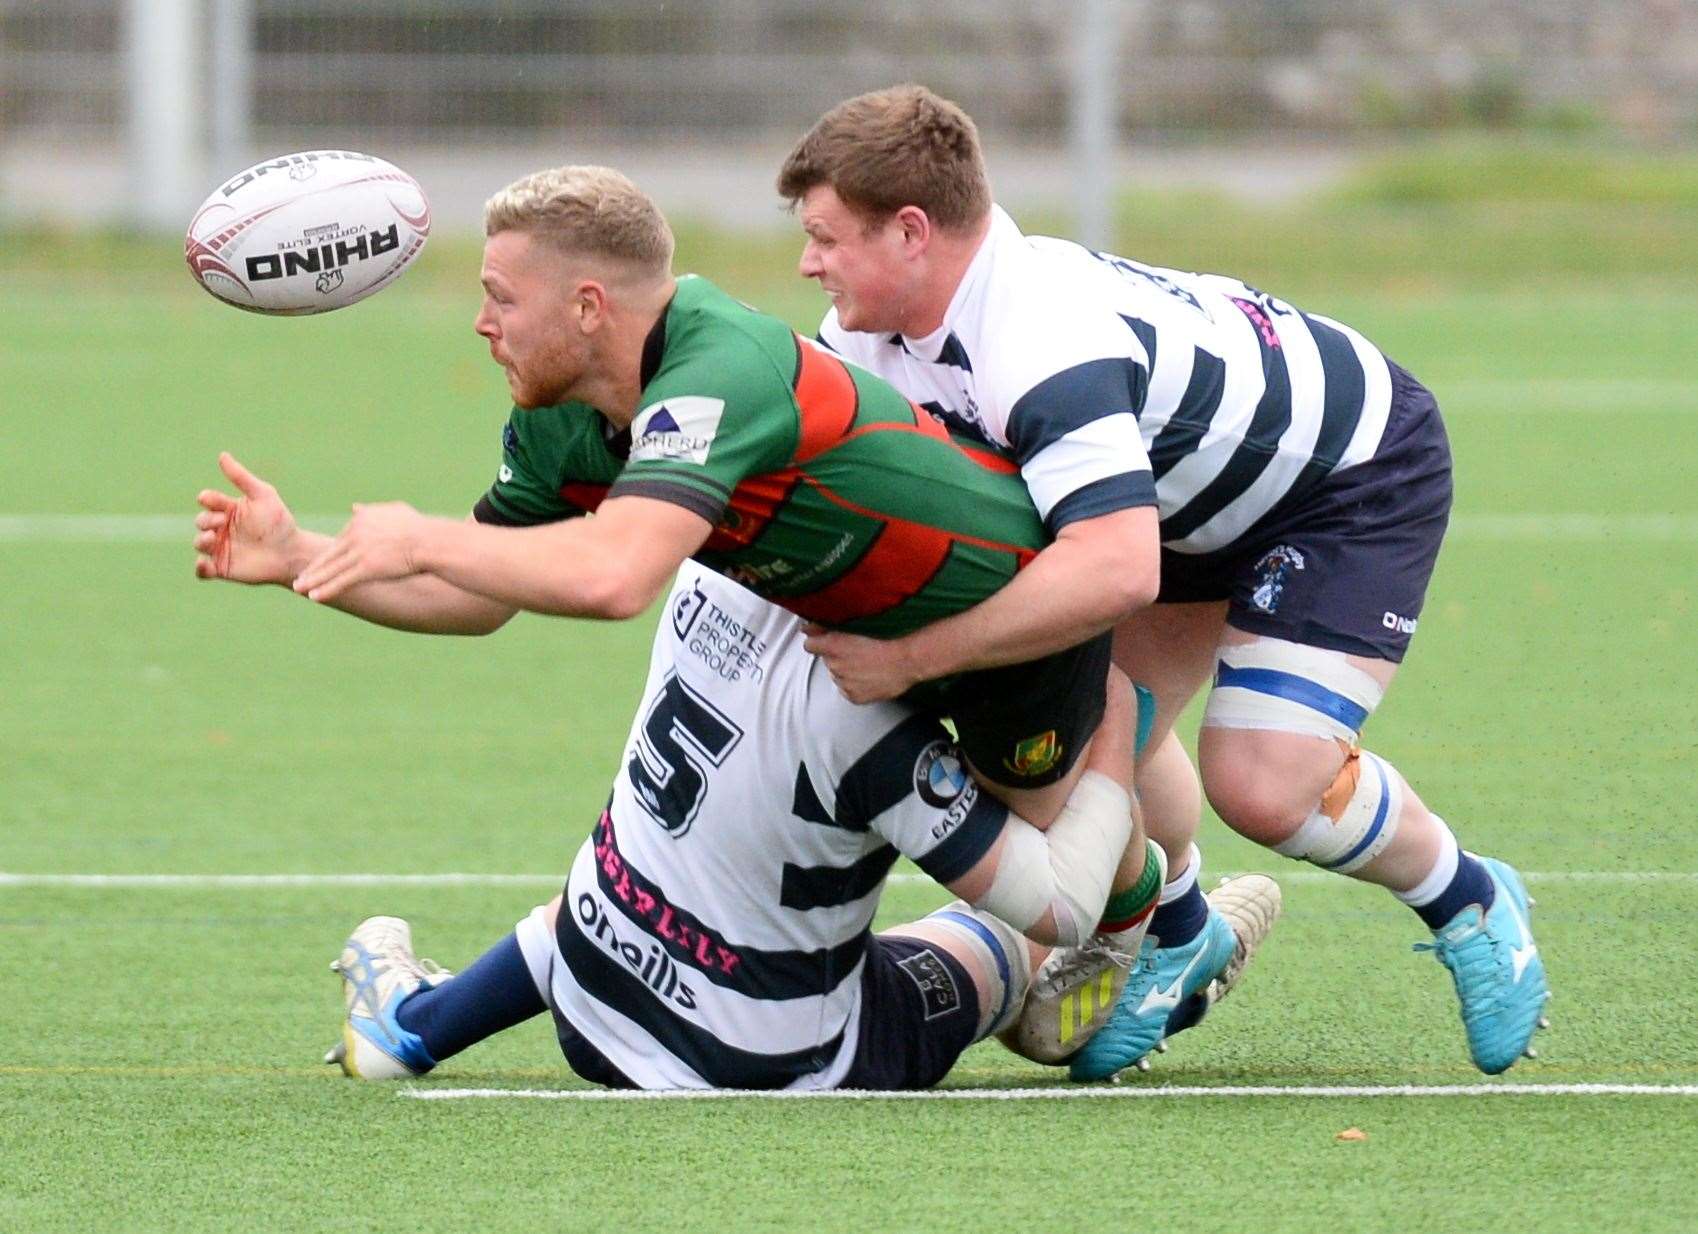 Heriot’s Blues did not have to work hard enough to win at Canal Park, according to Highland’s Dave Carson. Picture: Gary Anthony